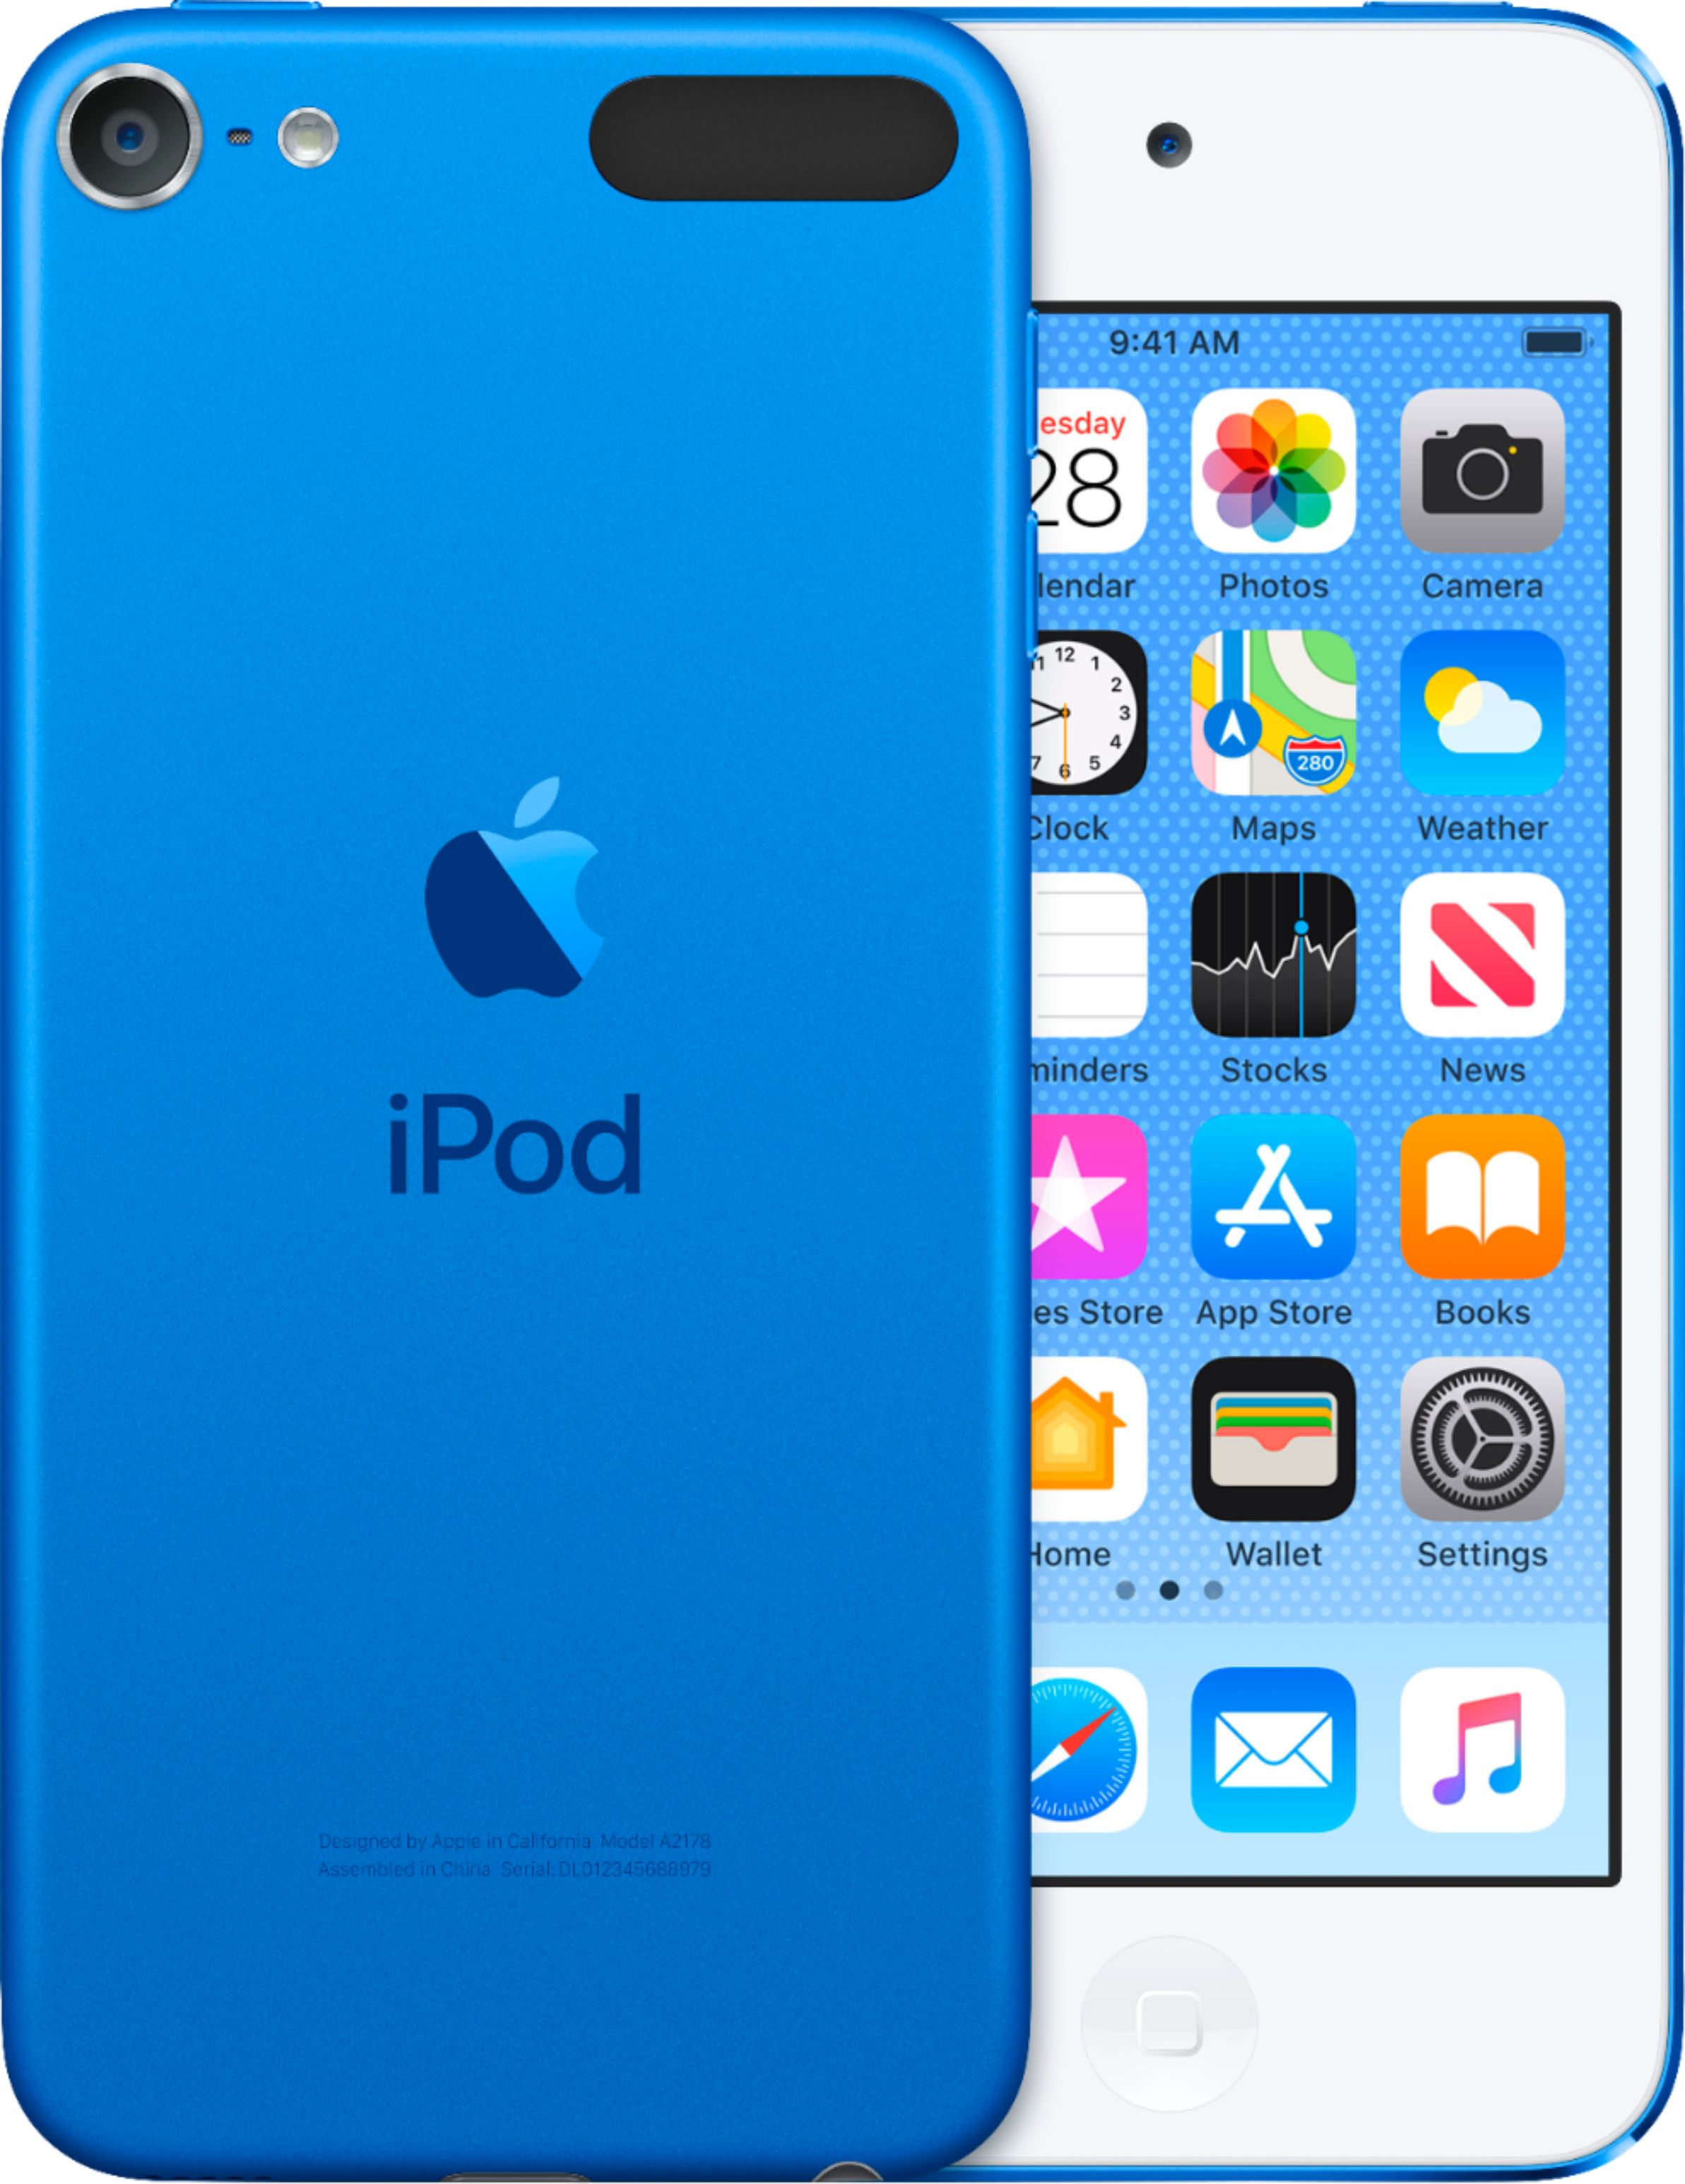 download the new version for ipod EdgeView 4